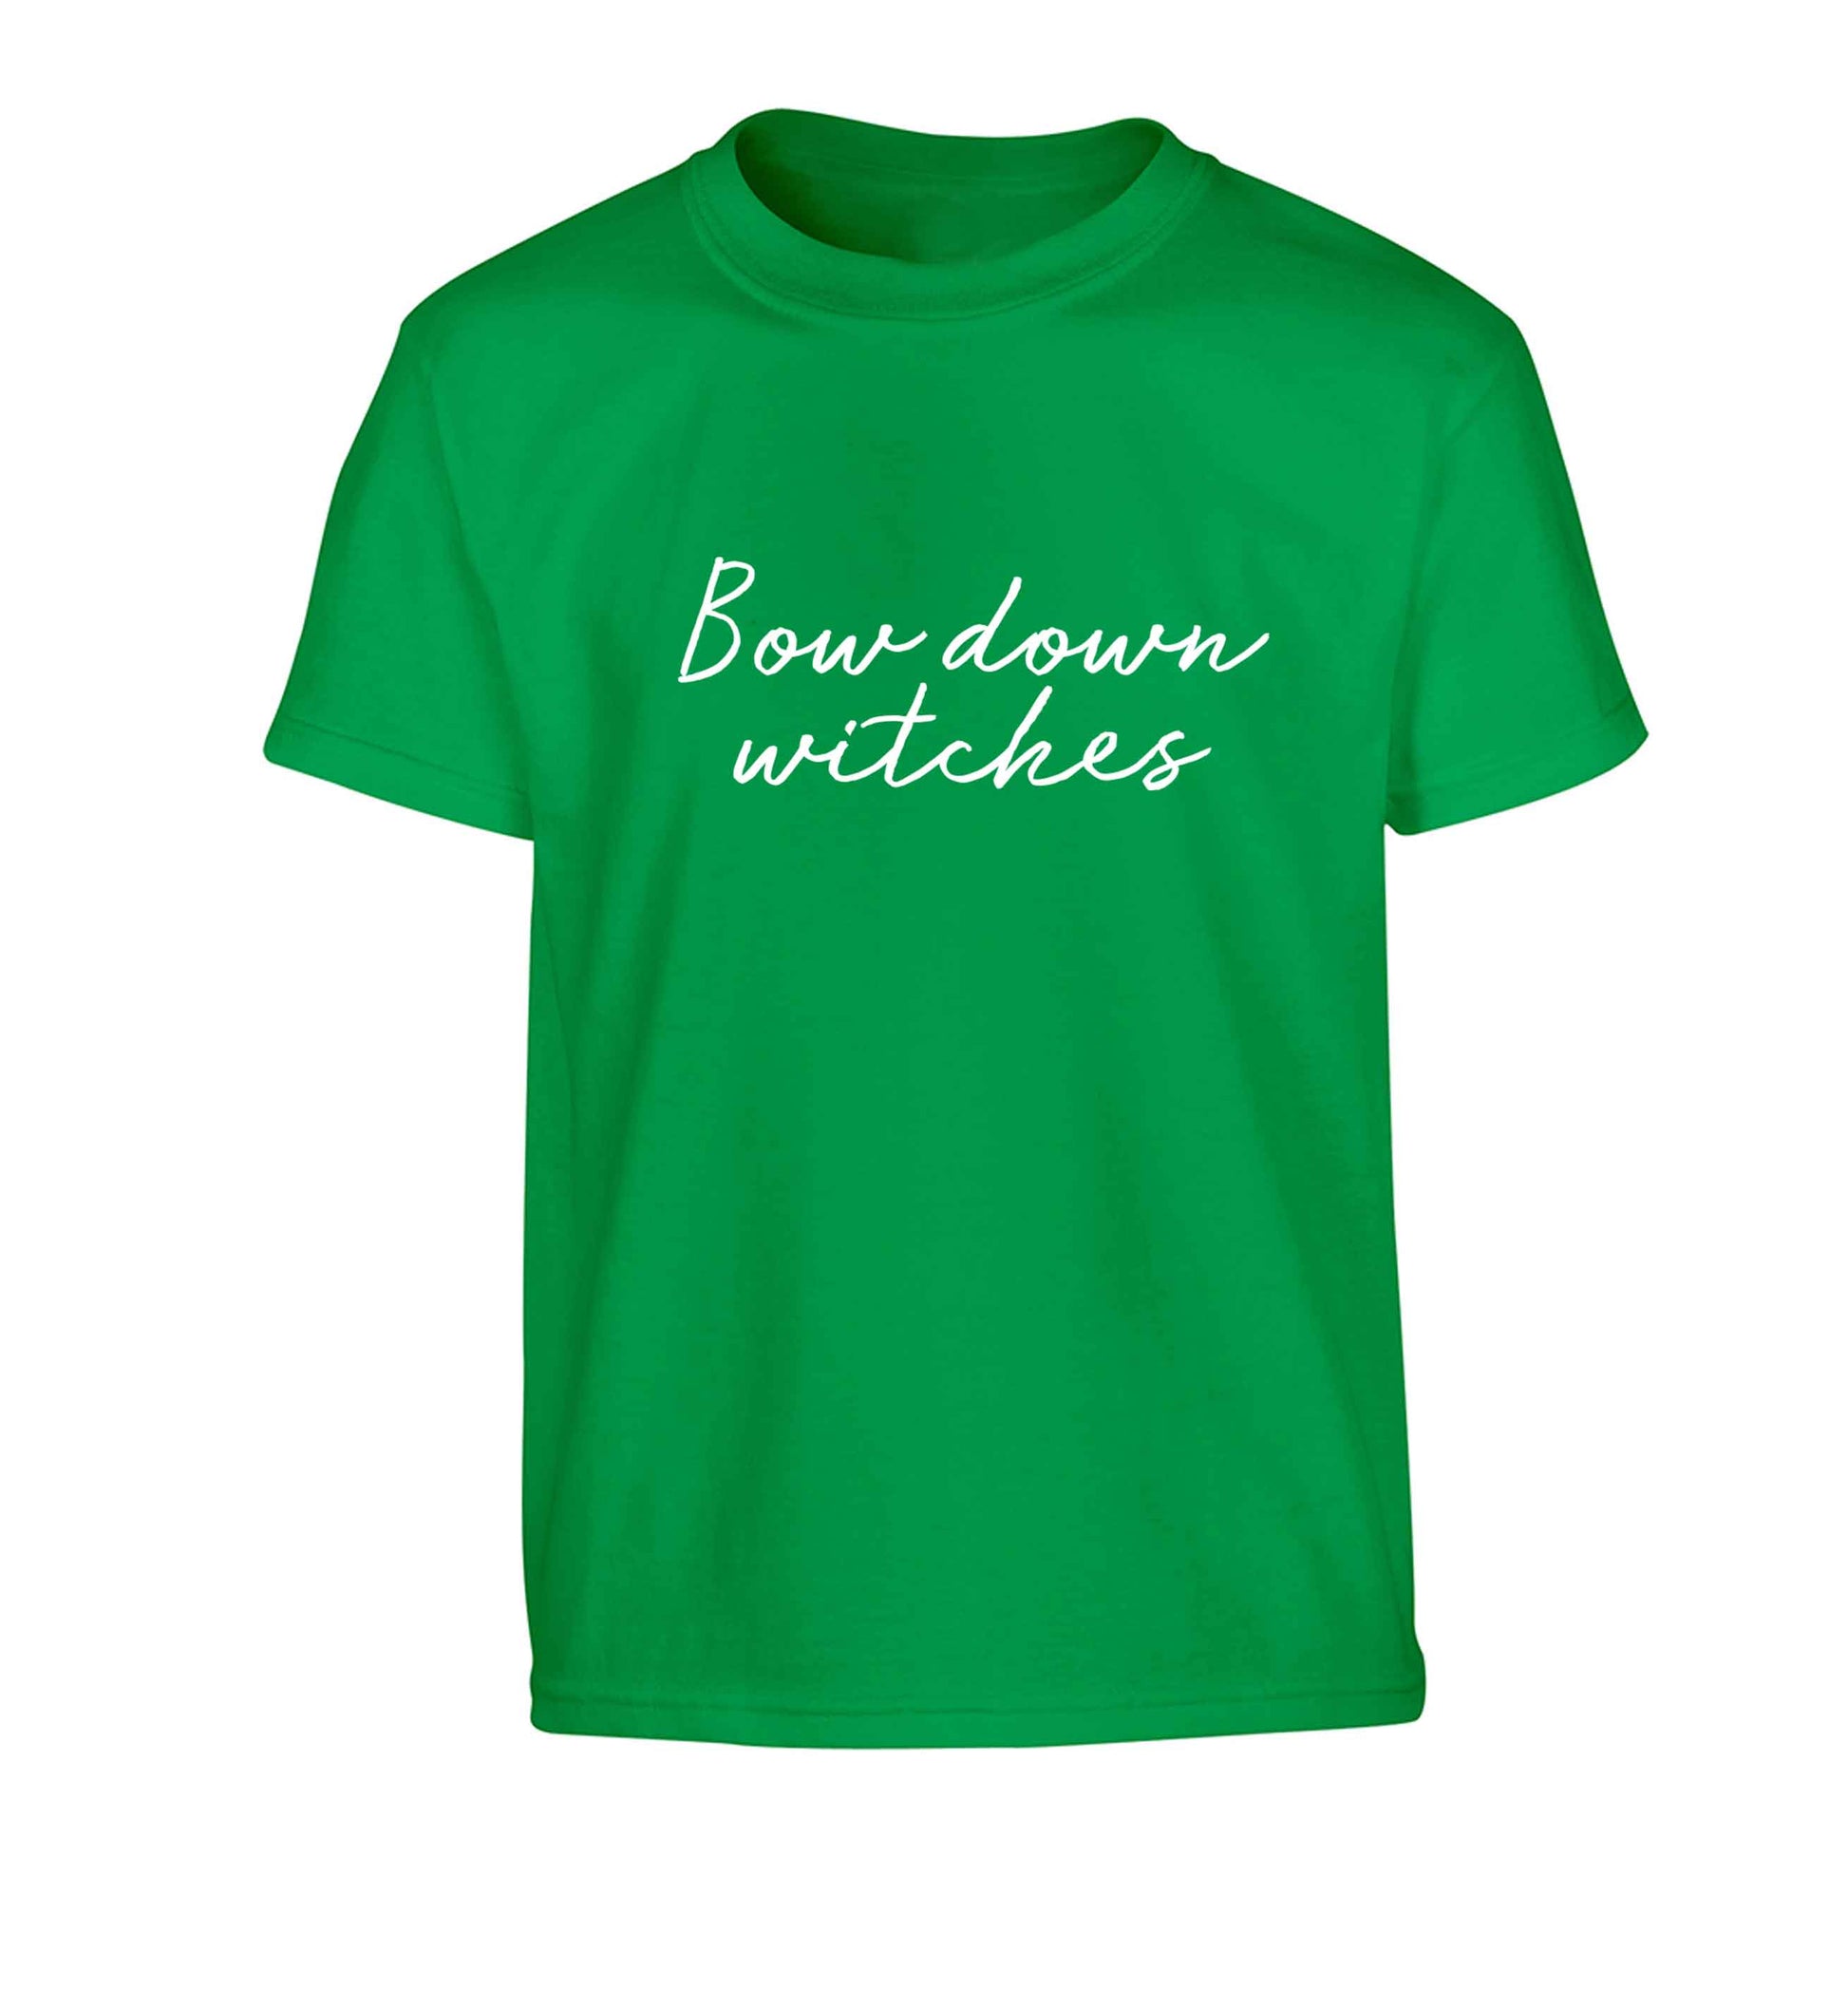 Bow down witches Children's green Tshirt 12-13 Years